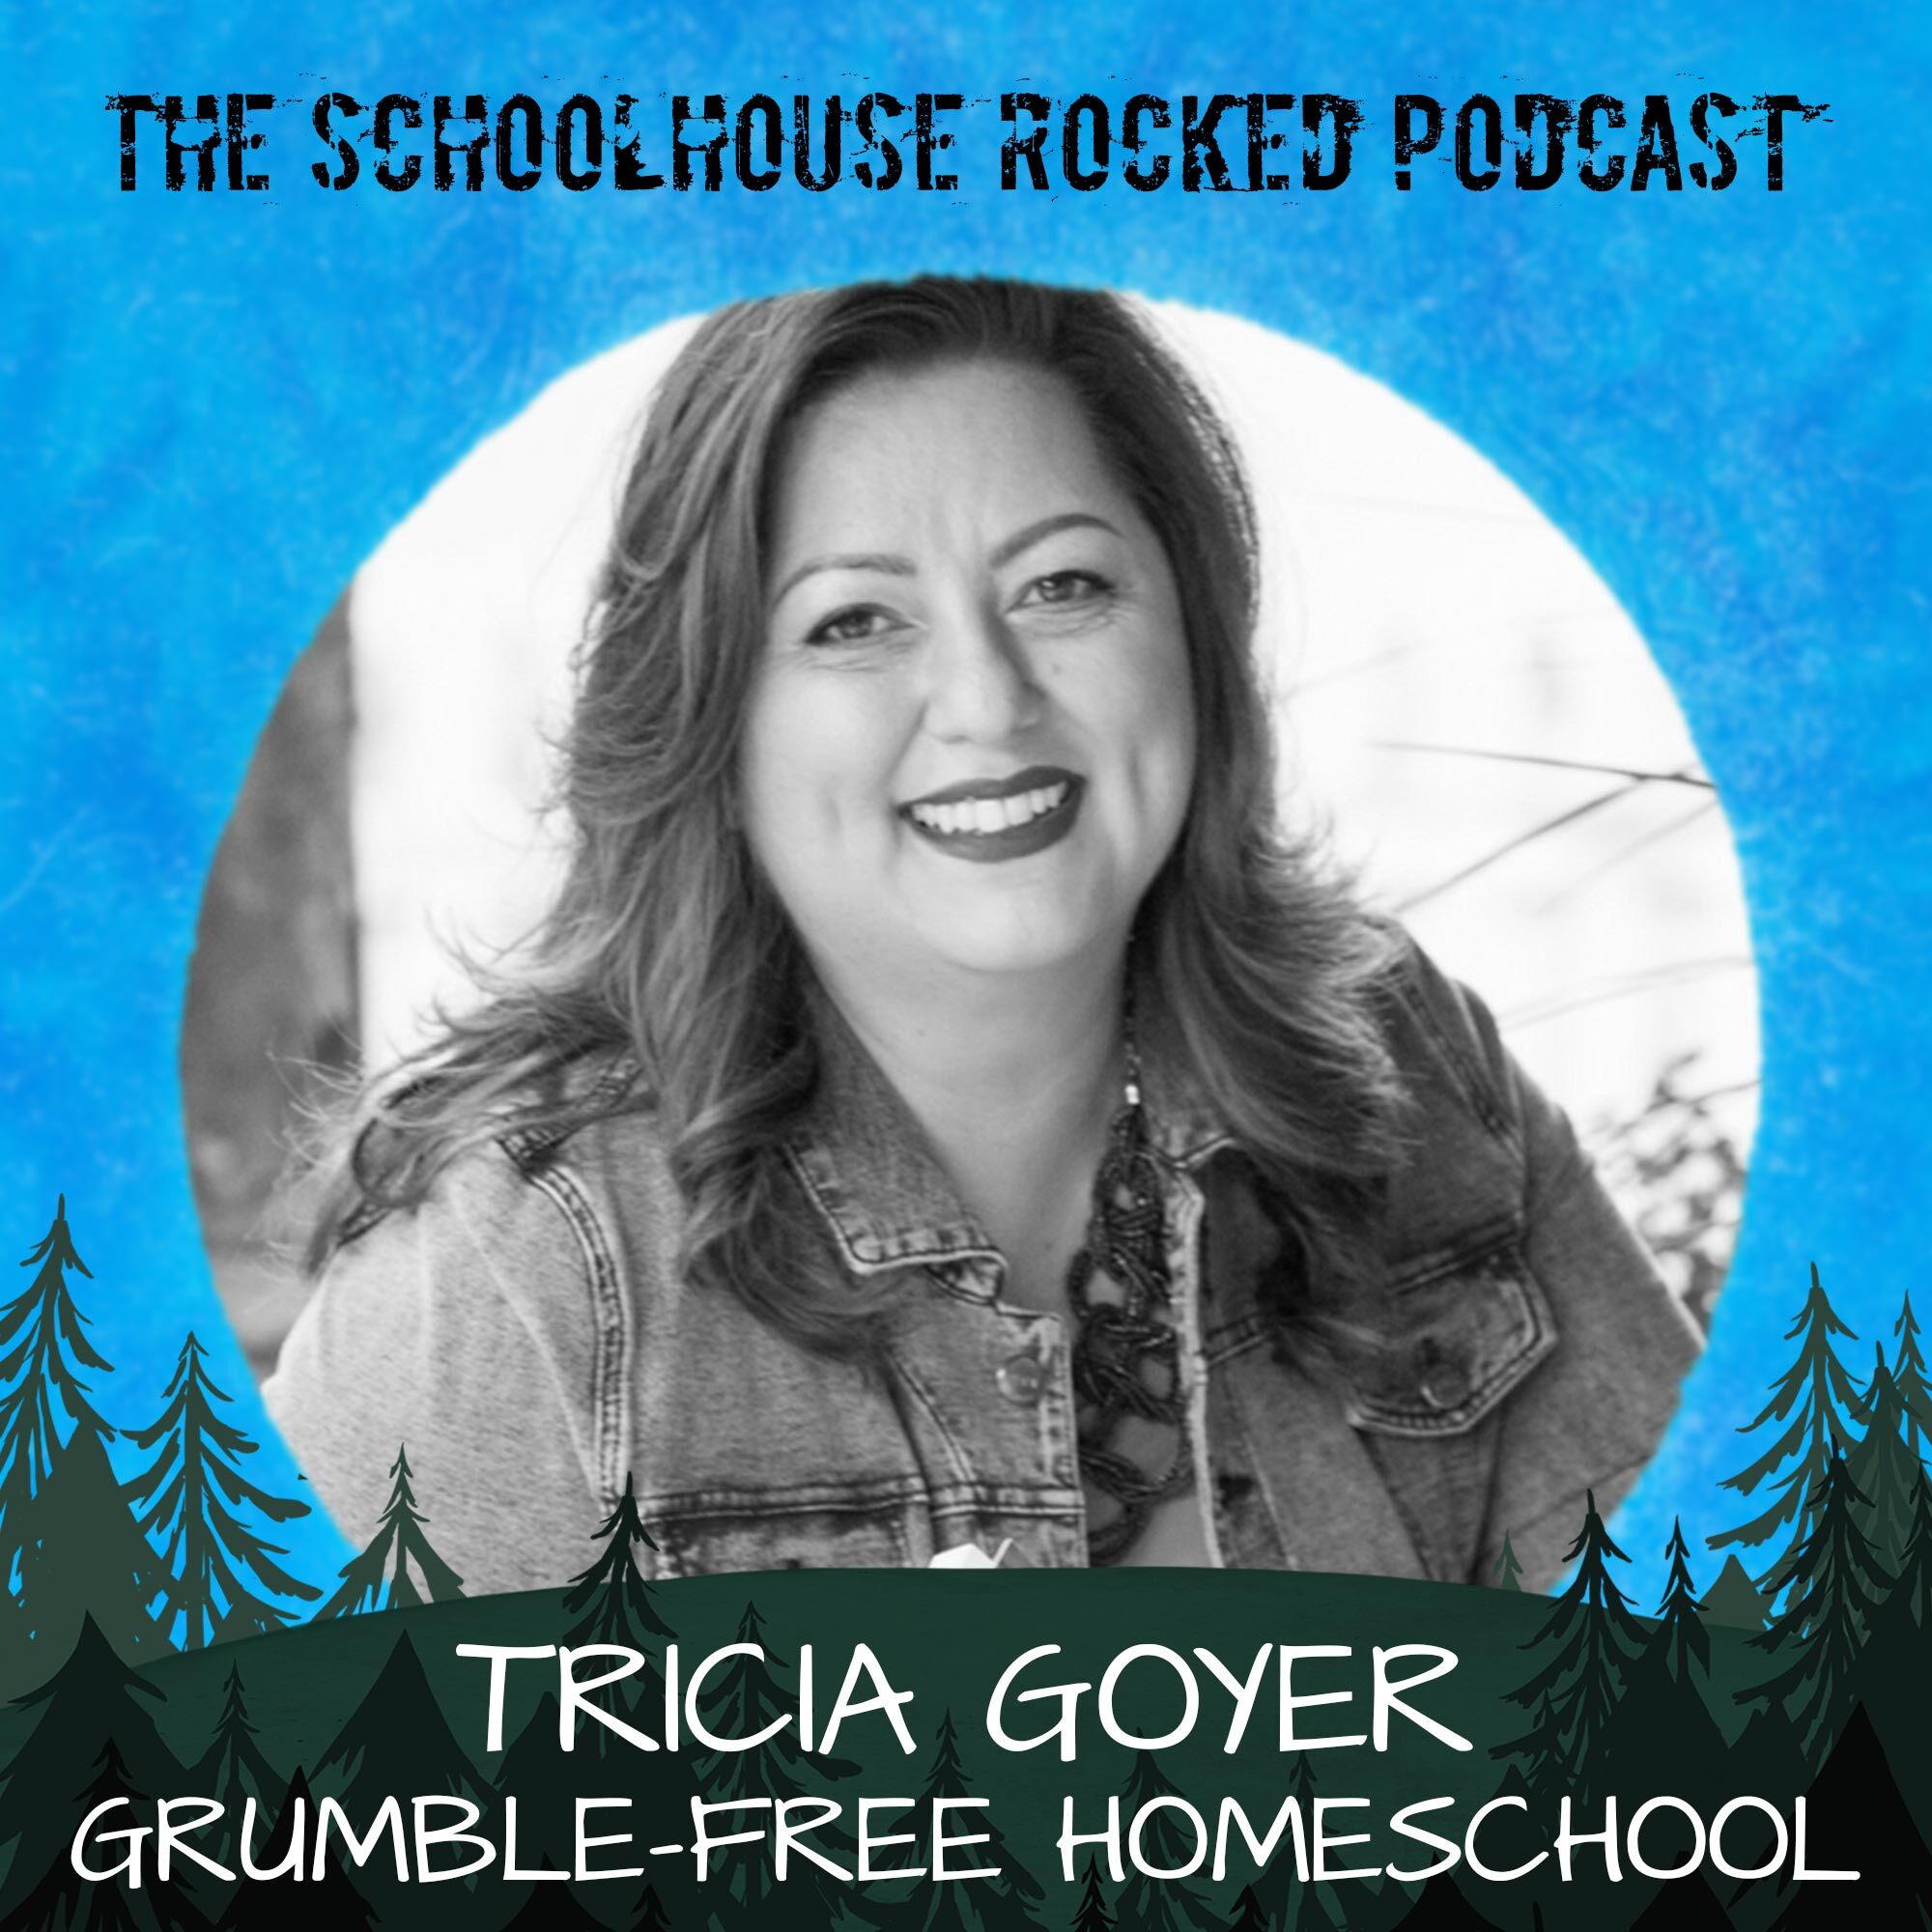 Grumble Free Homeschool - Peaceful Family Relationships - Interview with Tricia Goyer